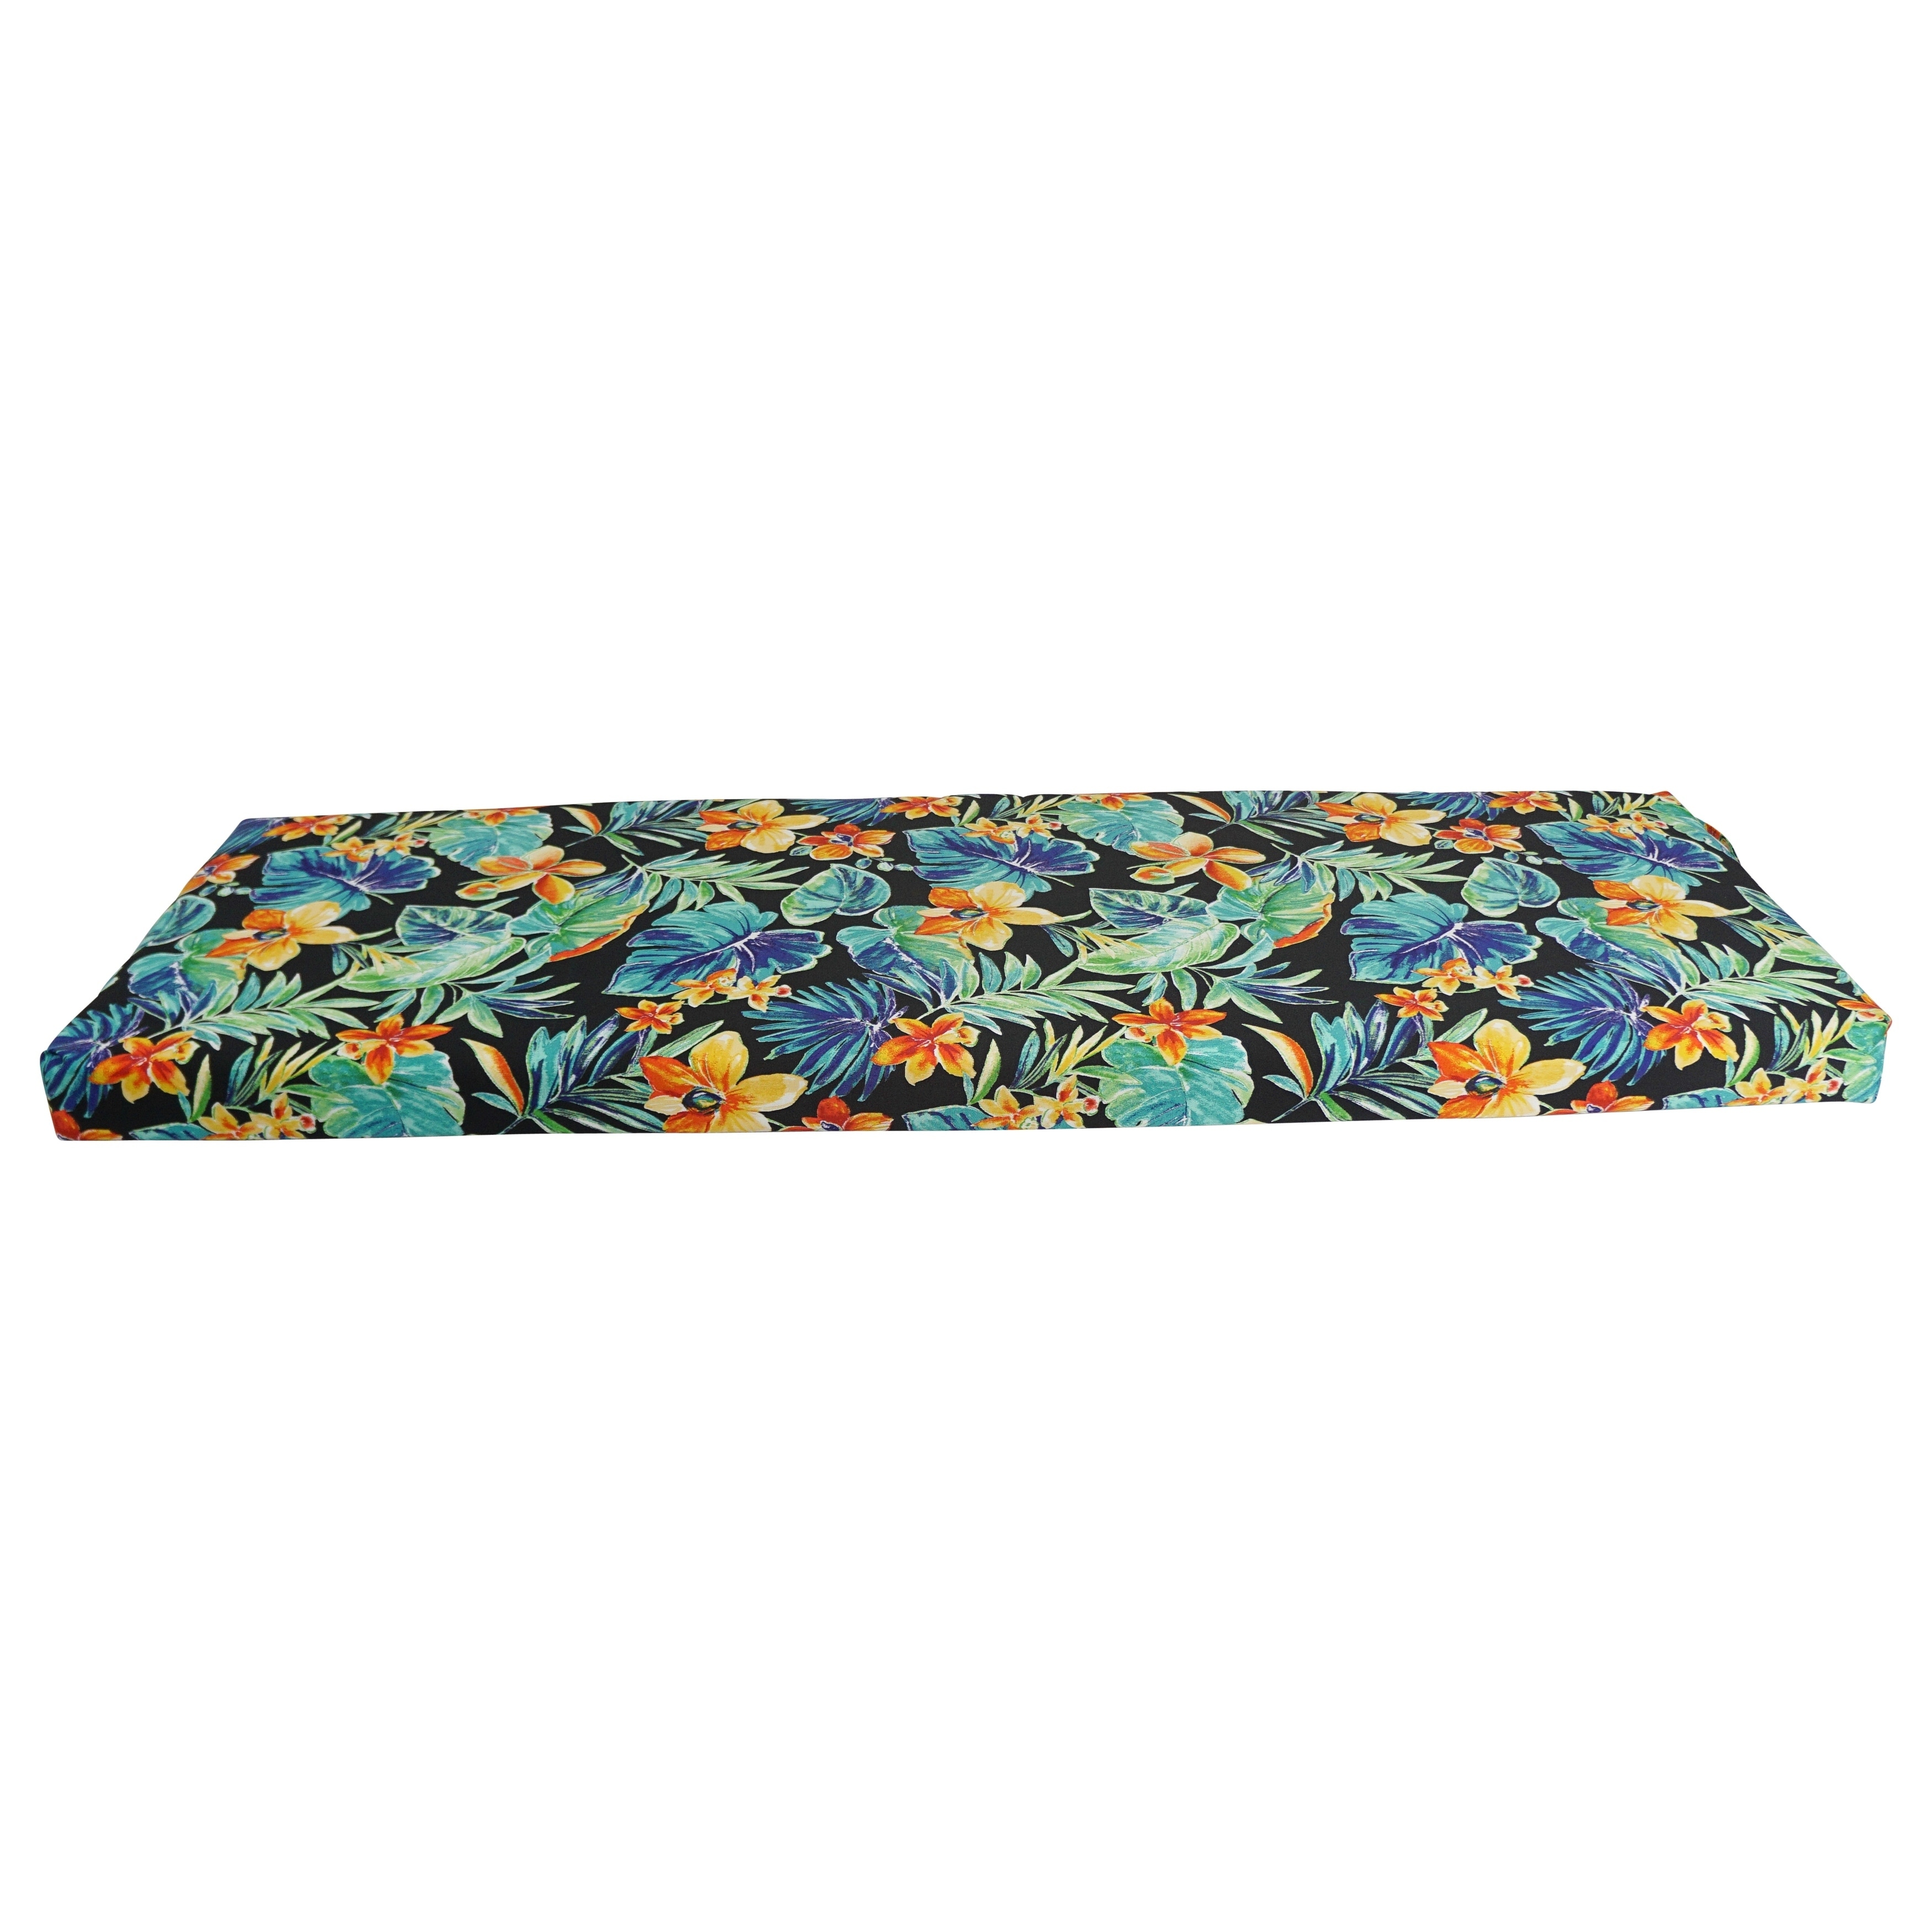 Blazing Needles 60x19 Inch Twill 3 Seater Bench Cushion for sale online